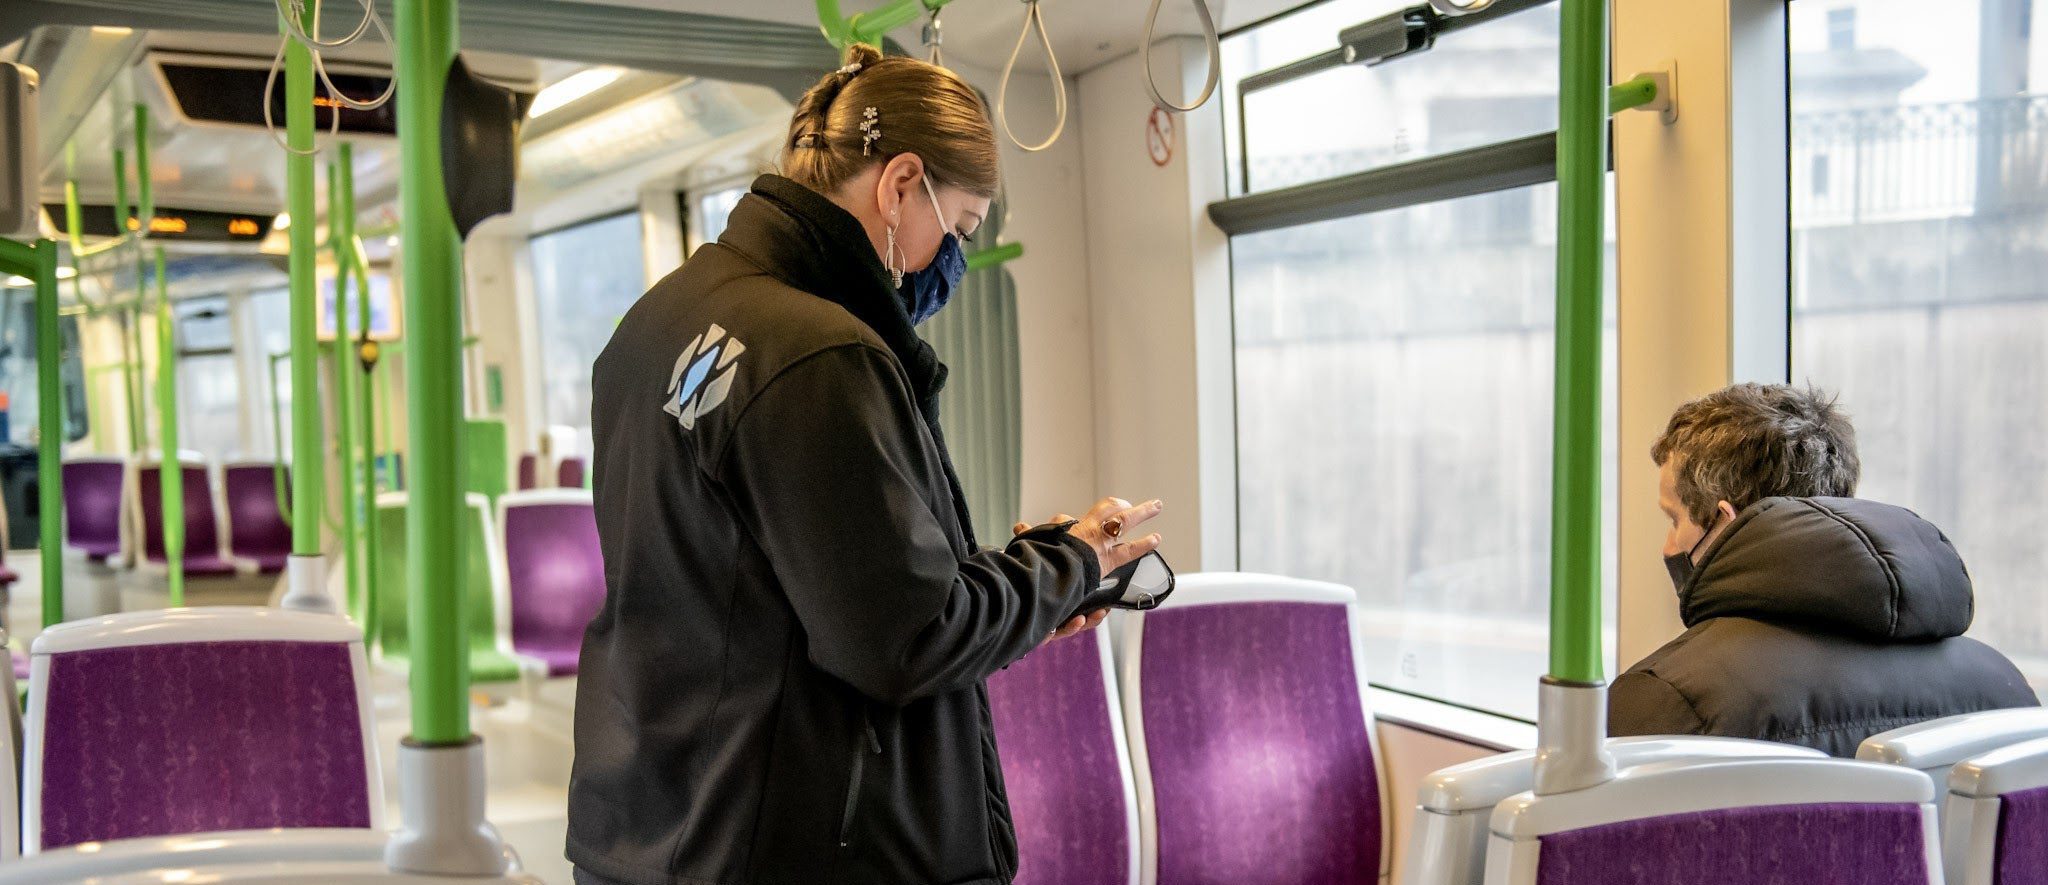 Woman working for WMM talking to passenger on tram